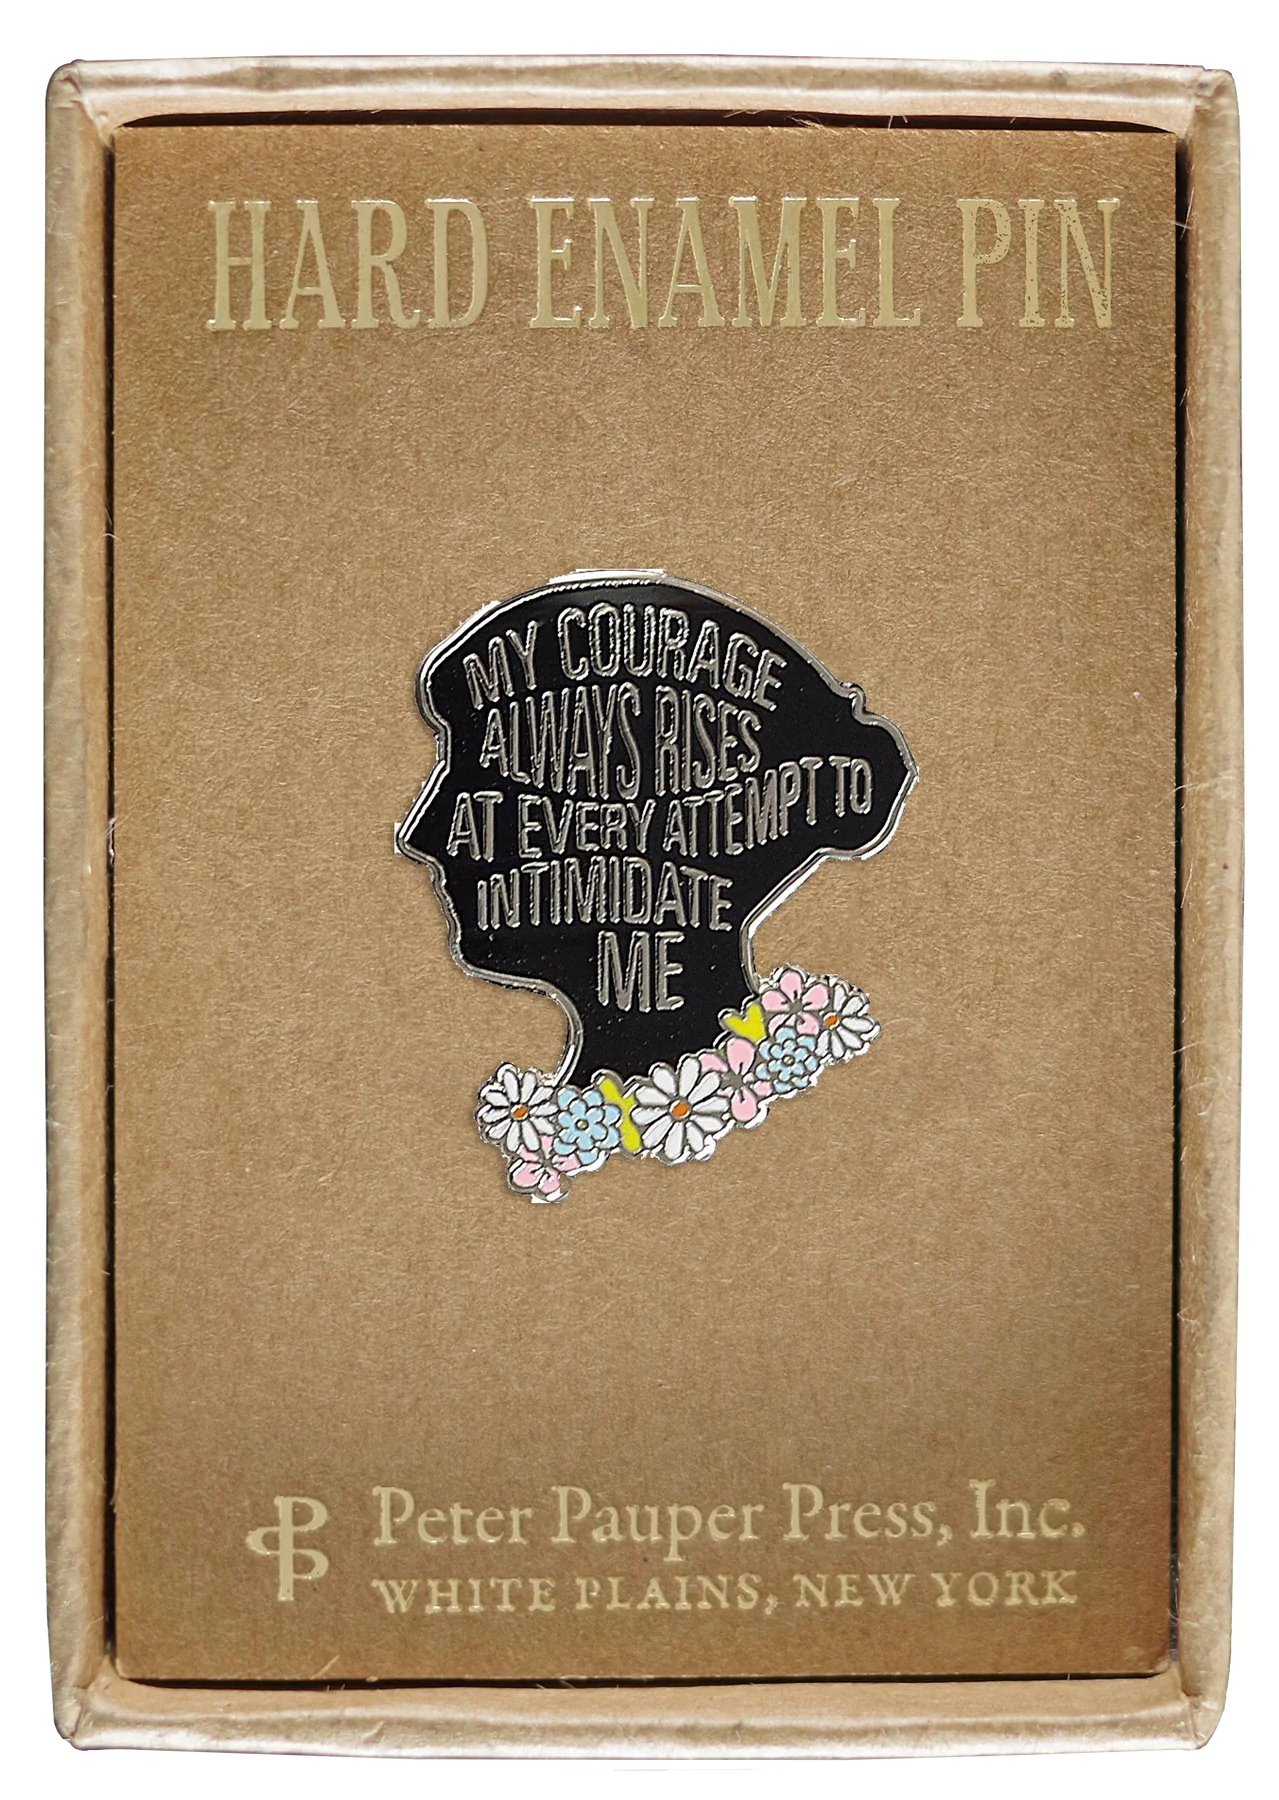 Black profile of Jane Austen with a flower necklace and text that reads "My courage always rises at every attempt to intimidate me" attached to a box that reads hard enamel pin